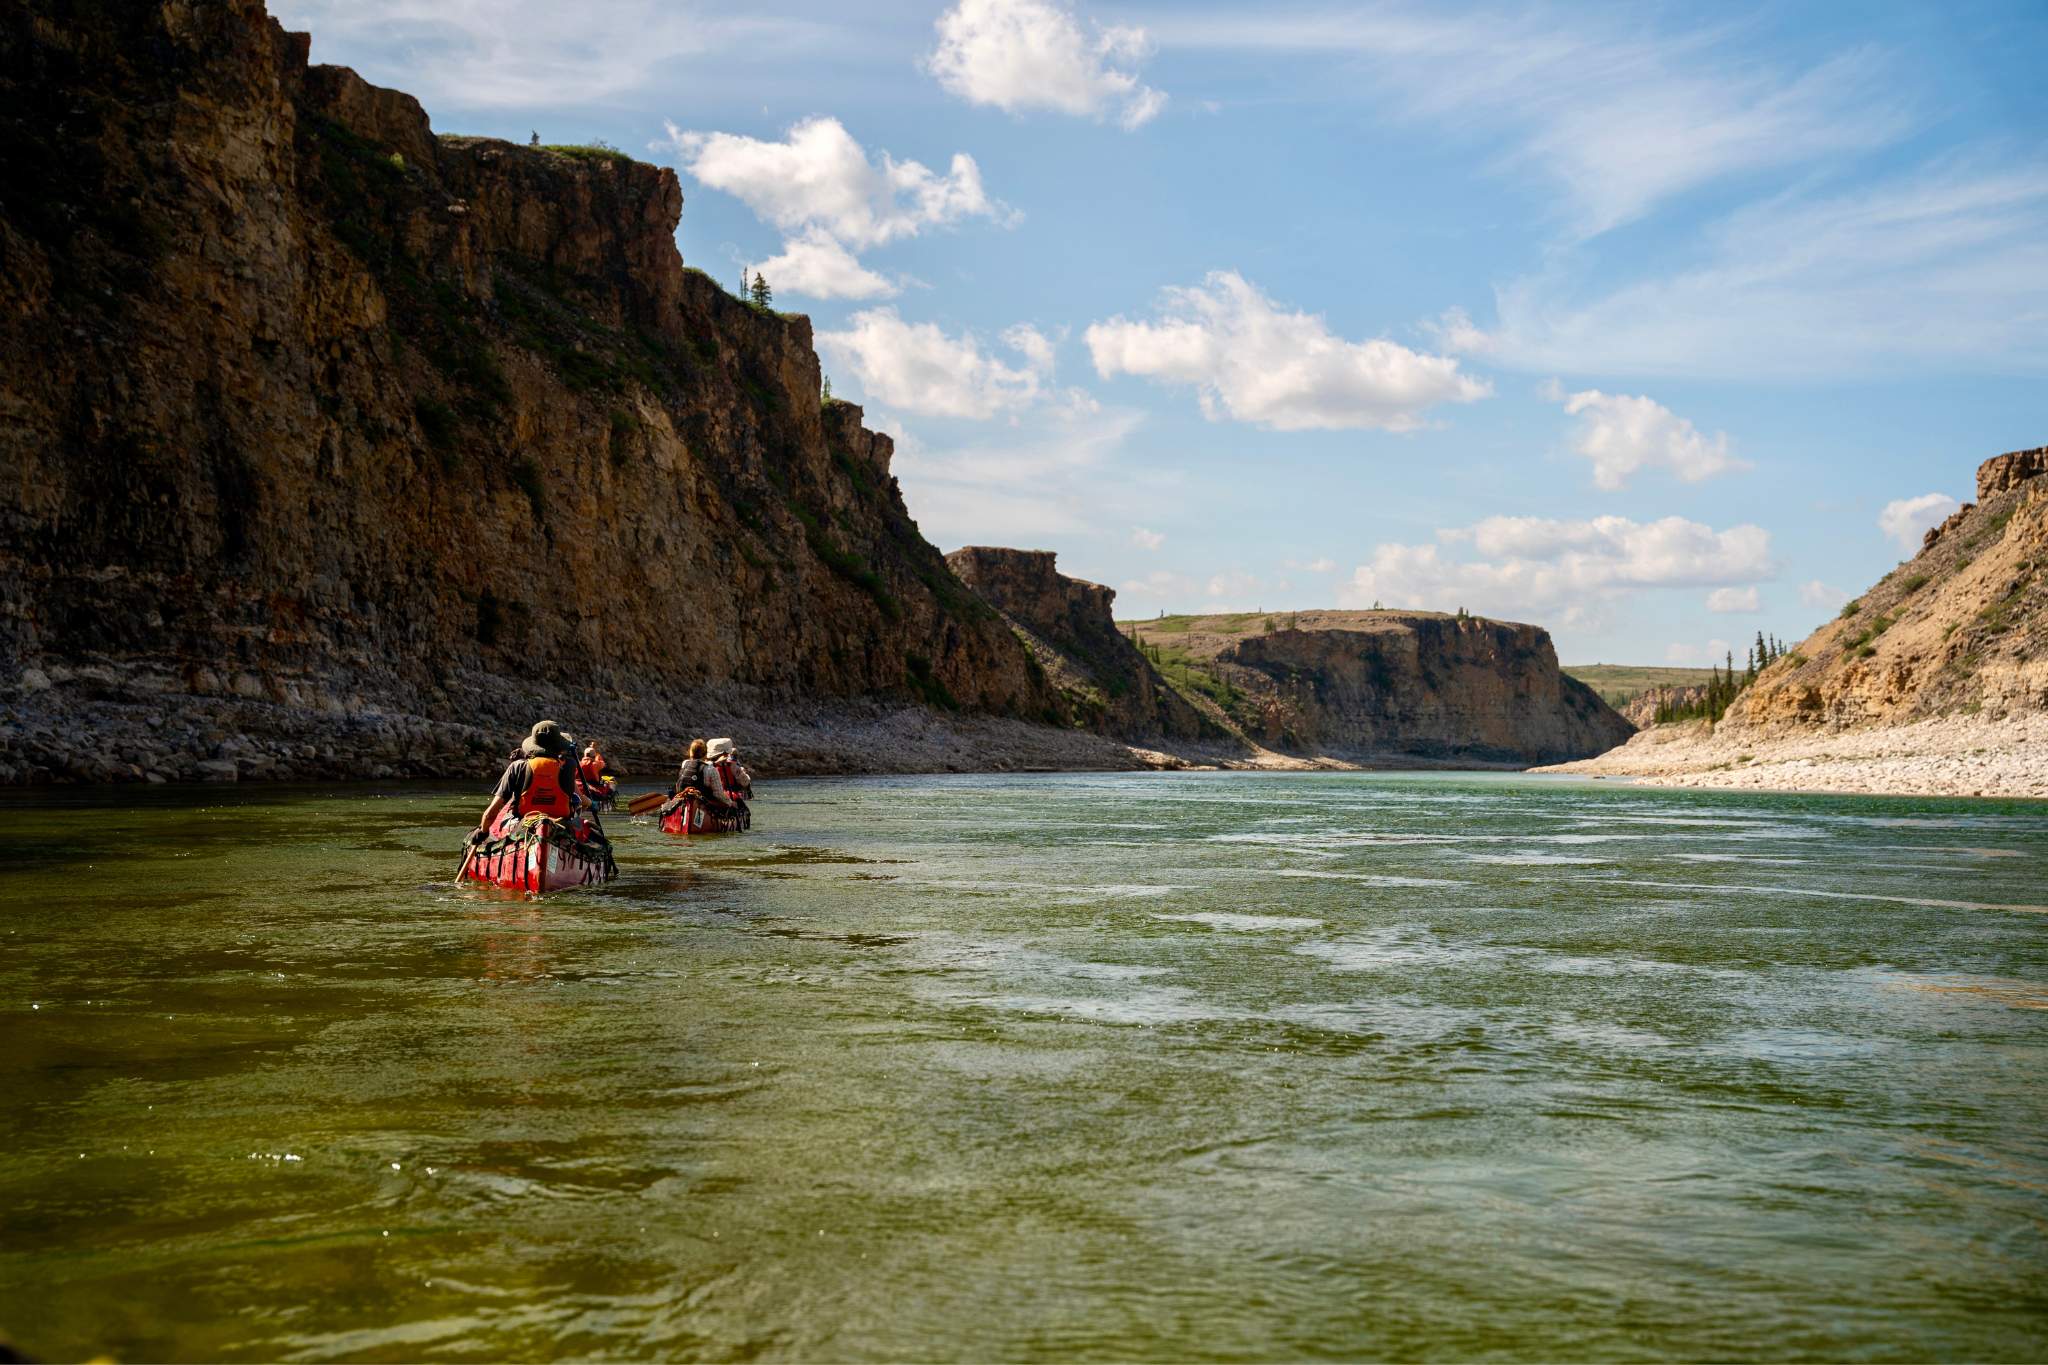 Canoeists navigating rapids amidst towering limestone cliffs on the Horton River, with Peregrine and Gyrfalcons taking flight.